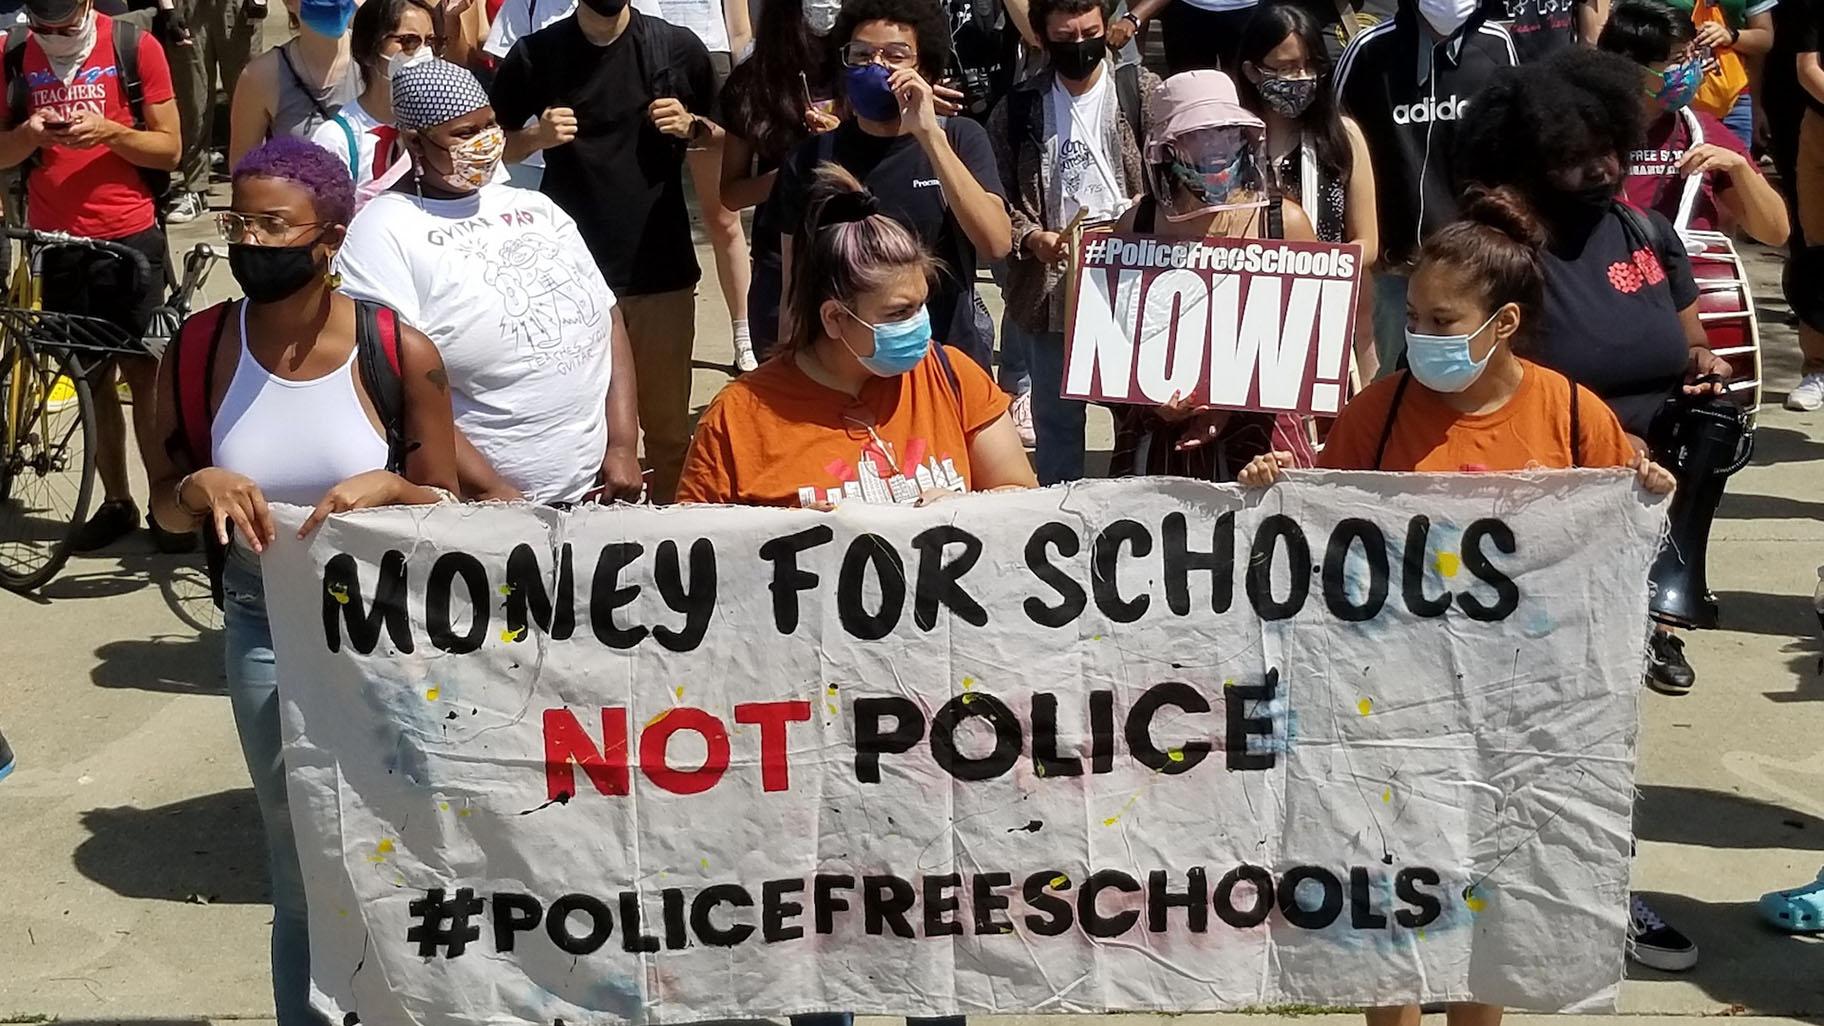 Youth activists organized a peaceful march to Mayor Lori Lightfoot’s home on Aug. 13, 2020 to demand the removal of resource officers from Chicago Public Schools. (Matt Masterson / WTTW News)